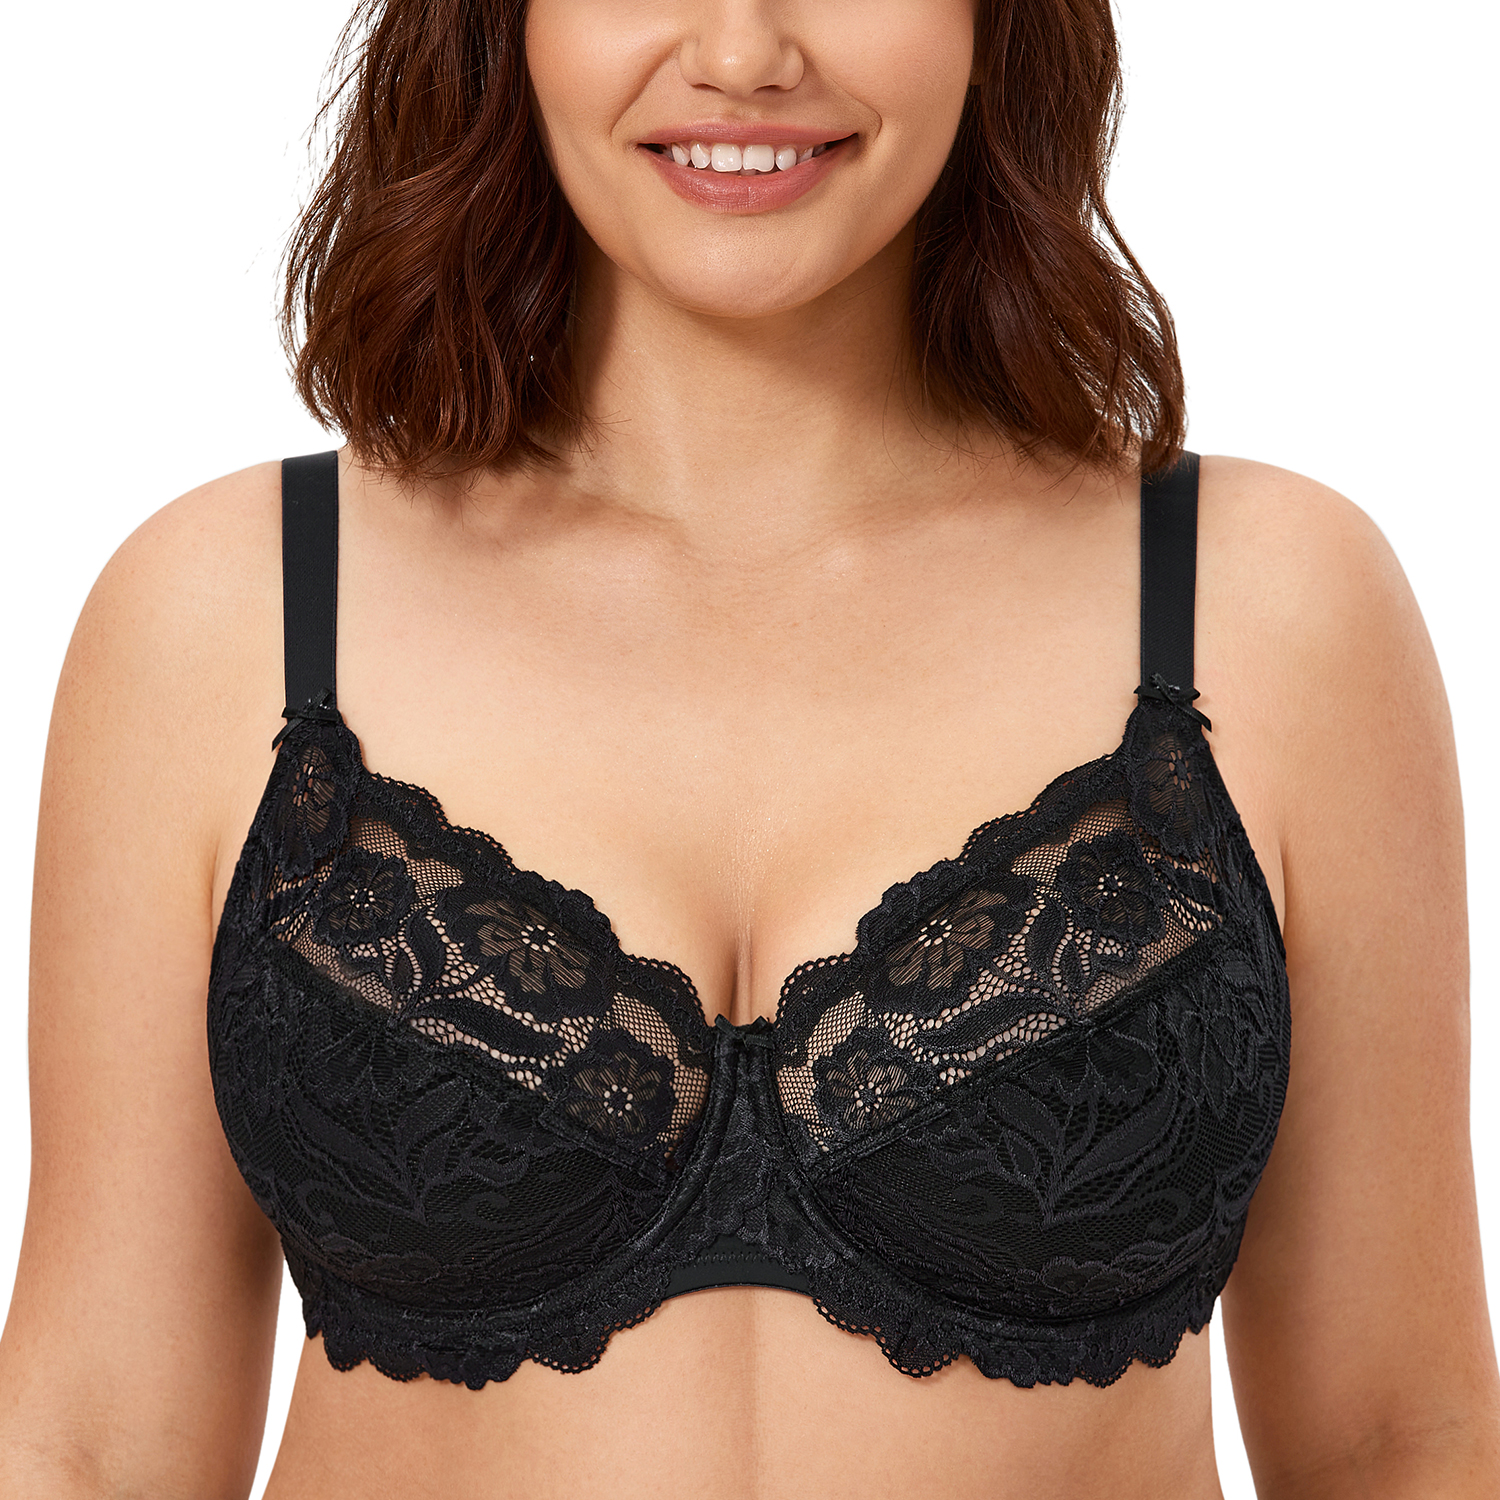 Women's Full Coverage Bra Underwired No Padding Floral Lace Plus